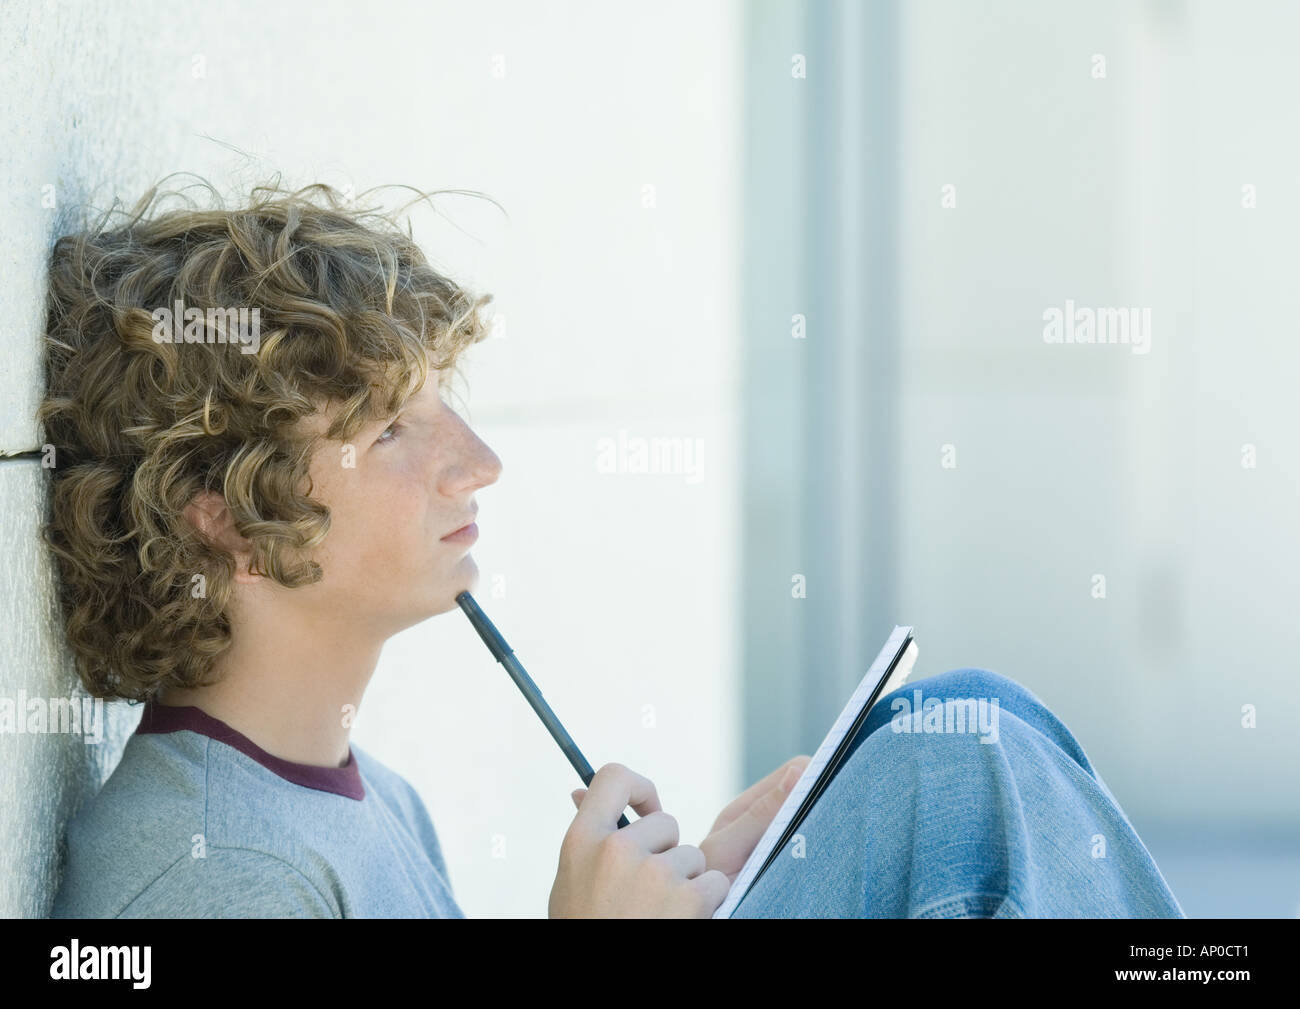 Teenage boy sitting with pen and notebook, side view Stock Photo